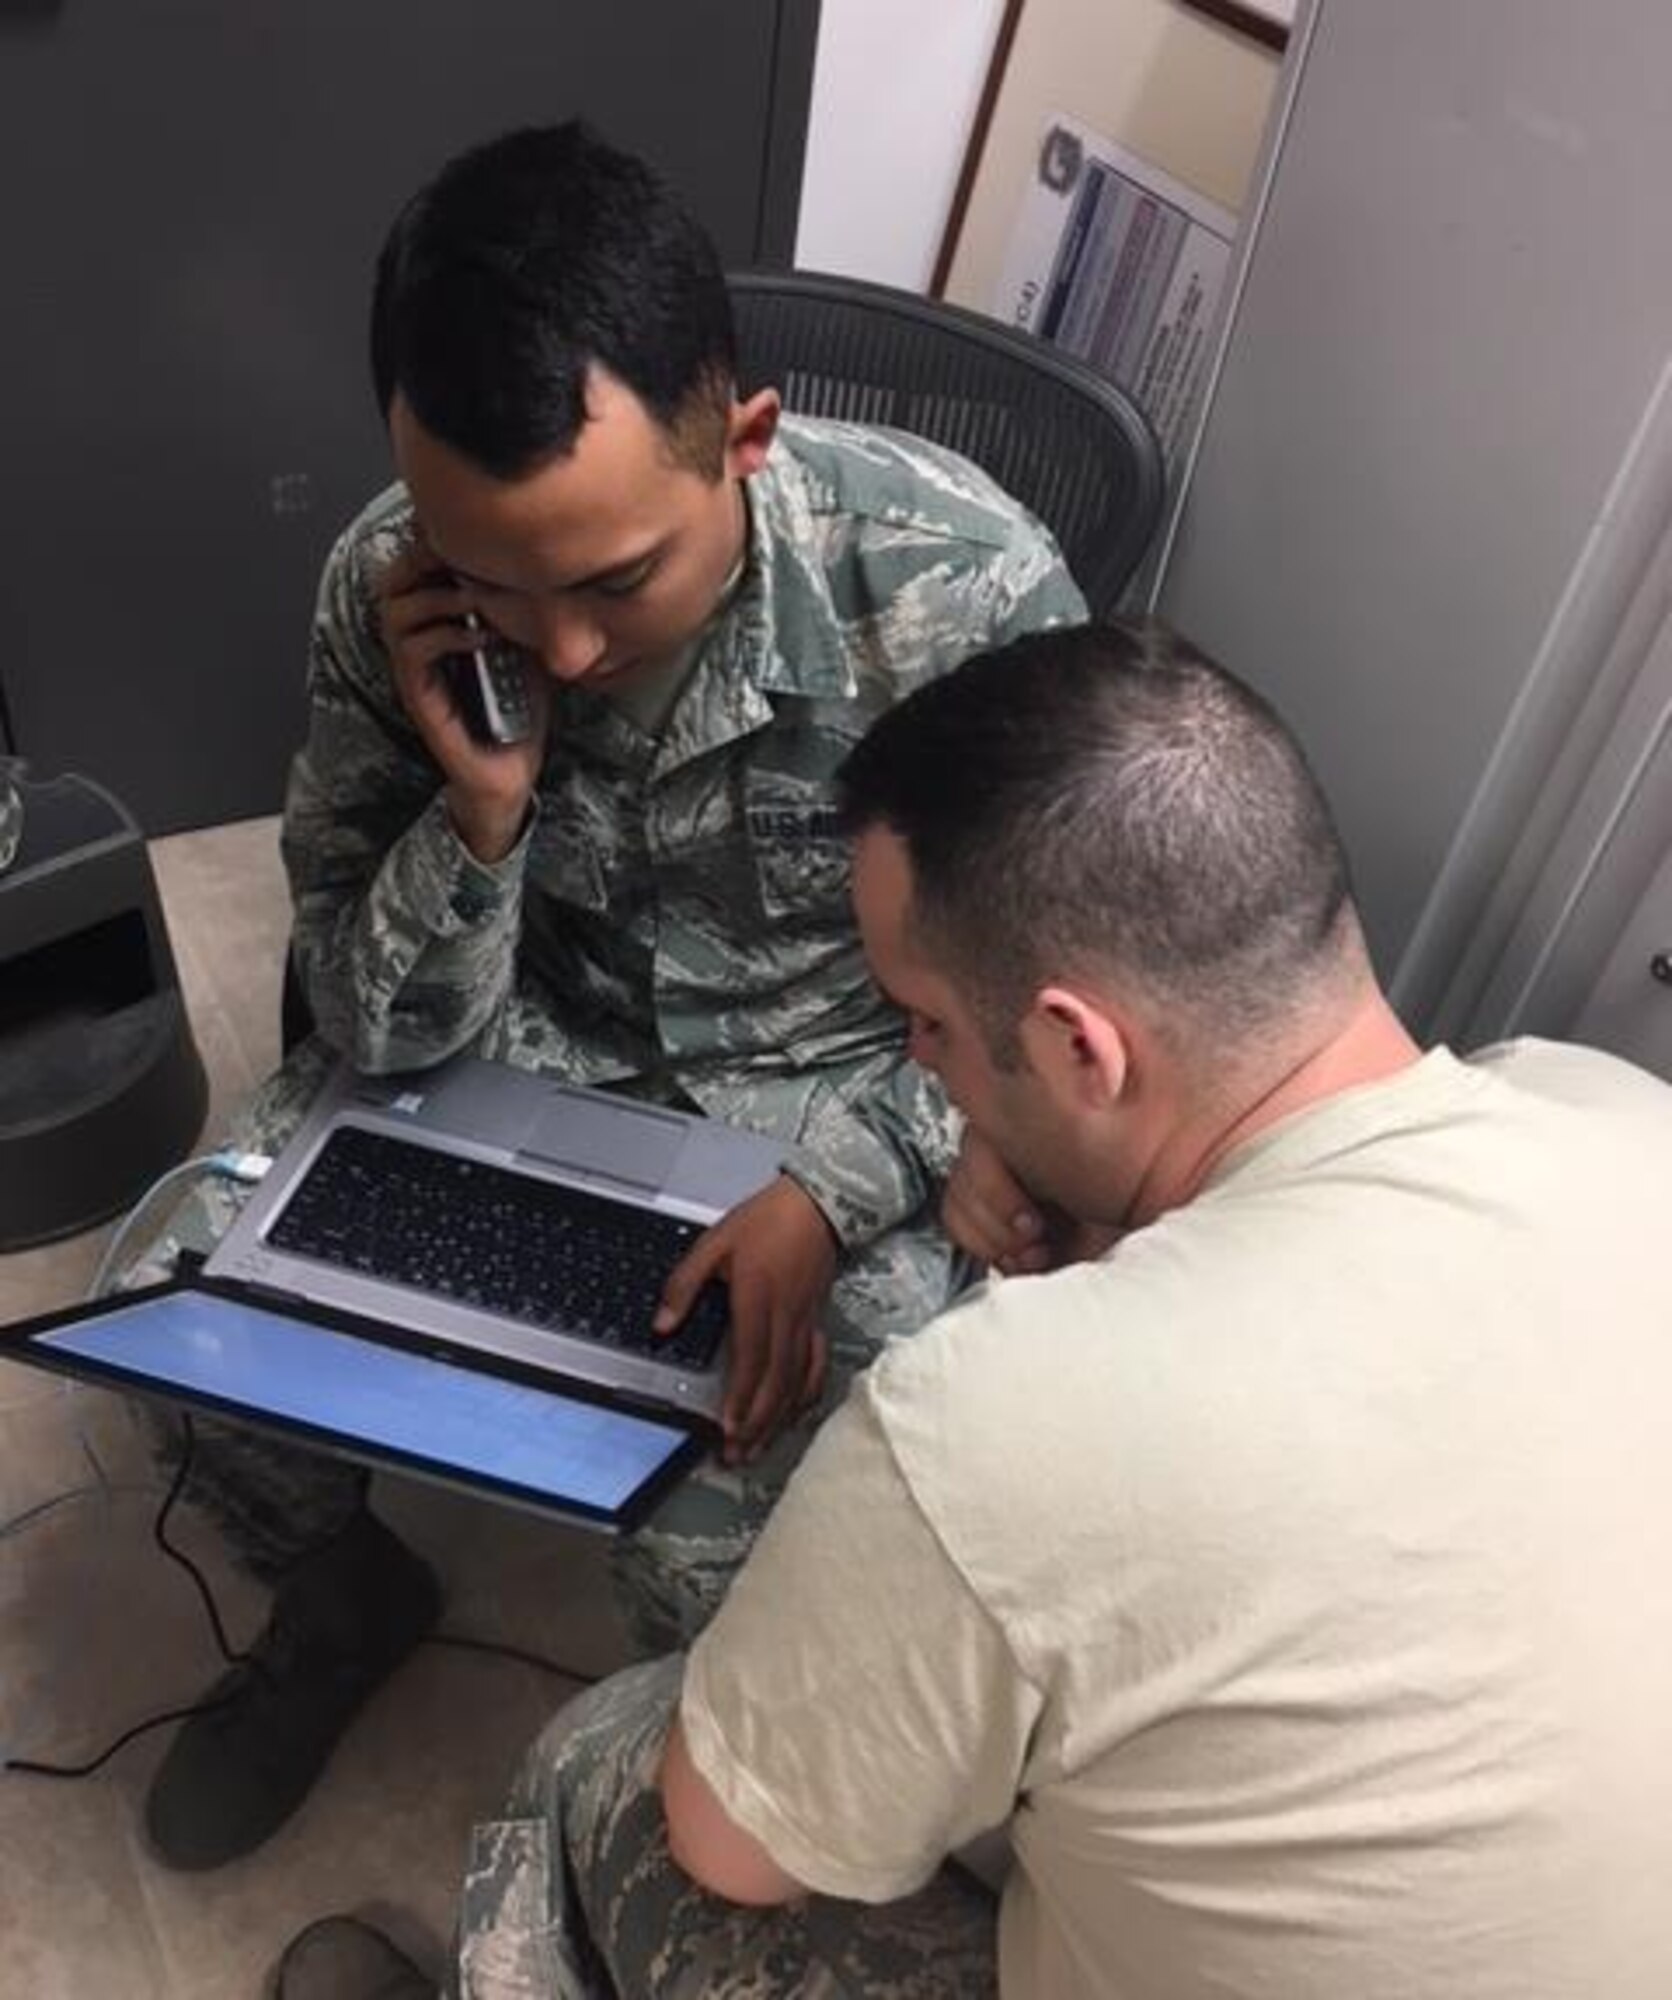 U.S. Airmen participate in a major upgrade project on command and control systems at Naval Station Rota, Dec. 8, 2017. The project involved Airmen assigned to four Air Force major commands. (Courtesy photo)